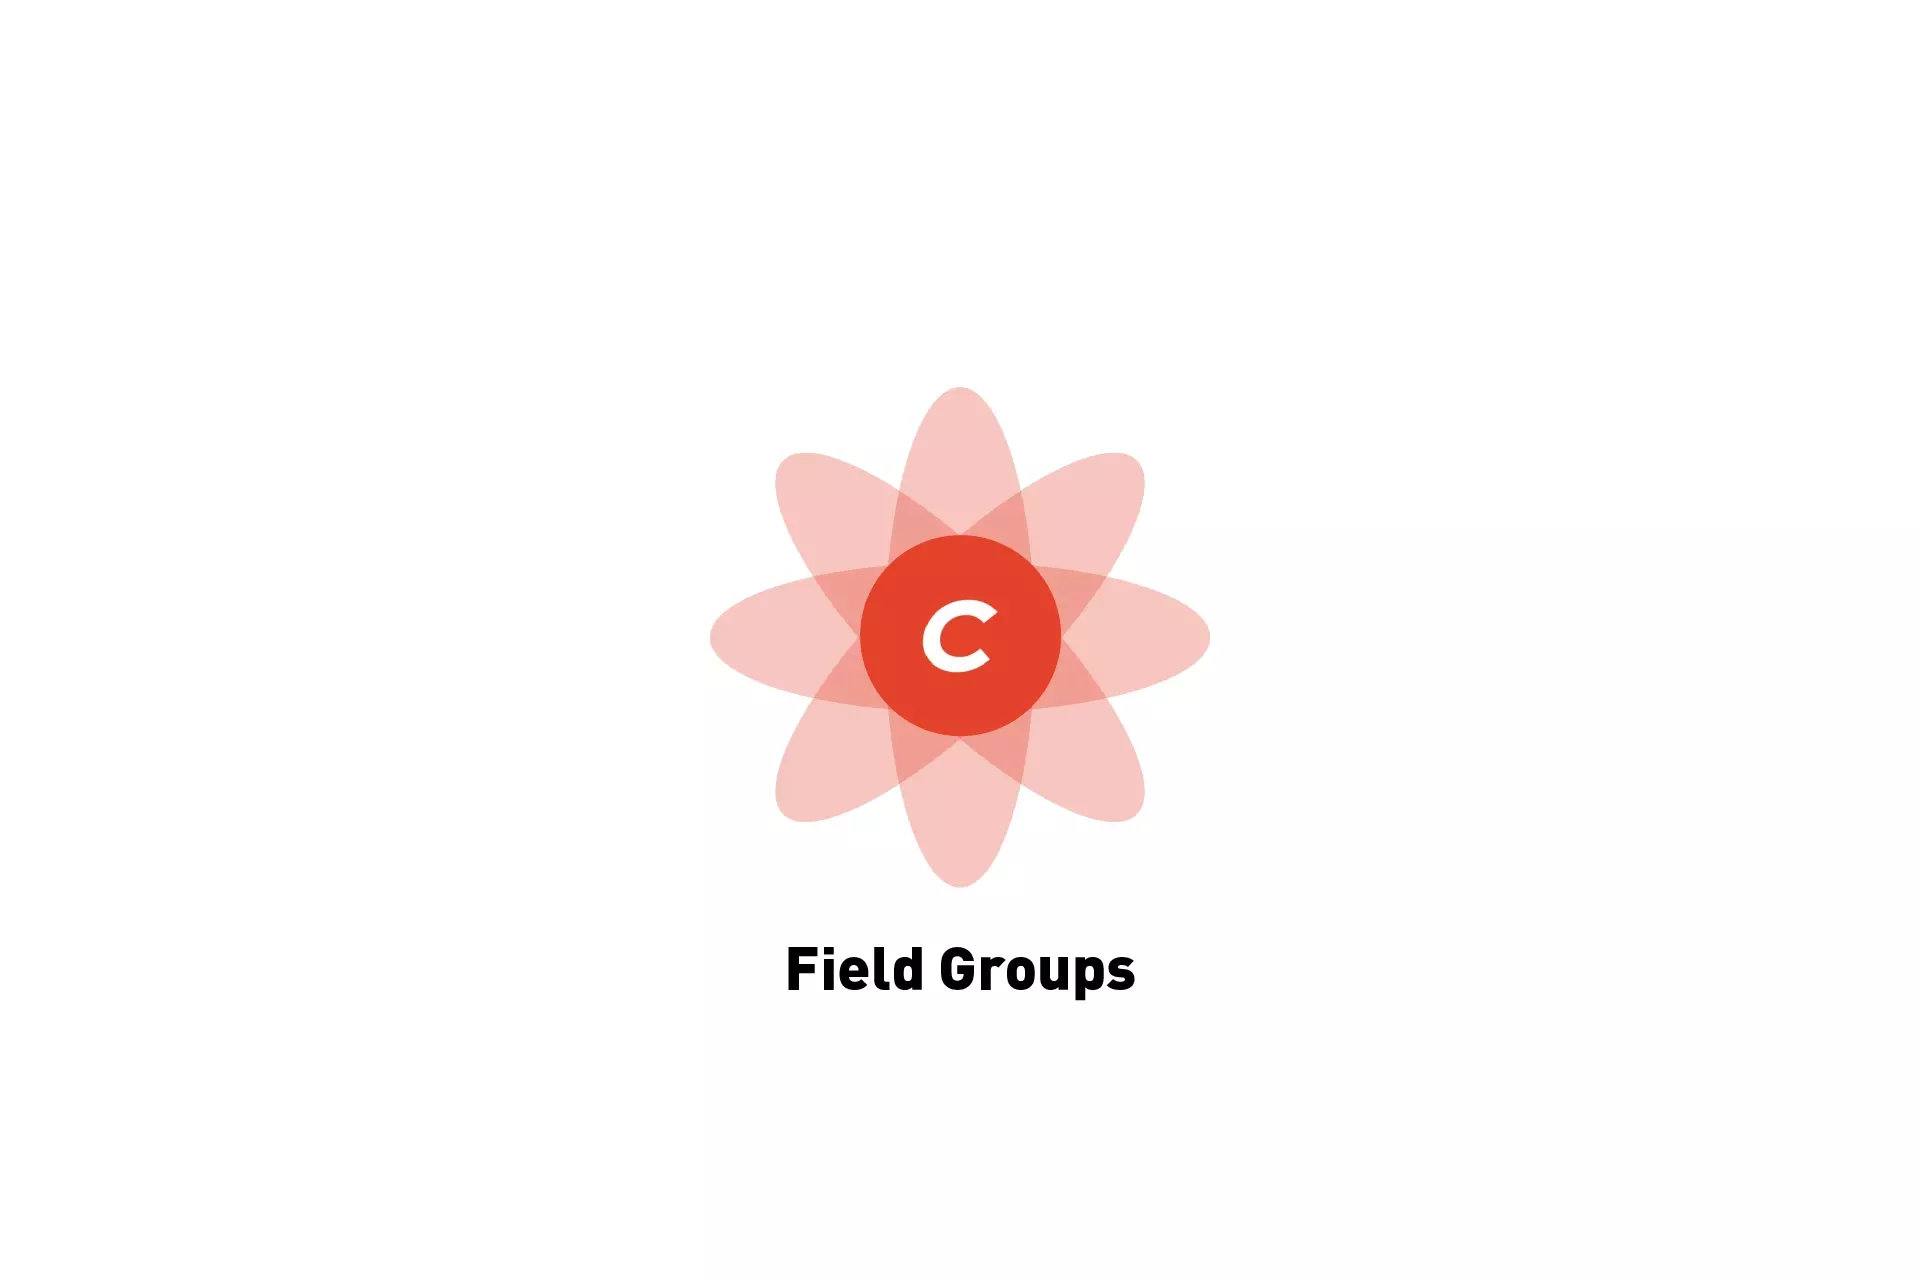 A flower that represents Craft CMS with the text "Field Groups" beneath it.